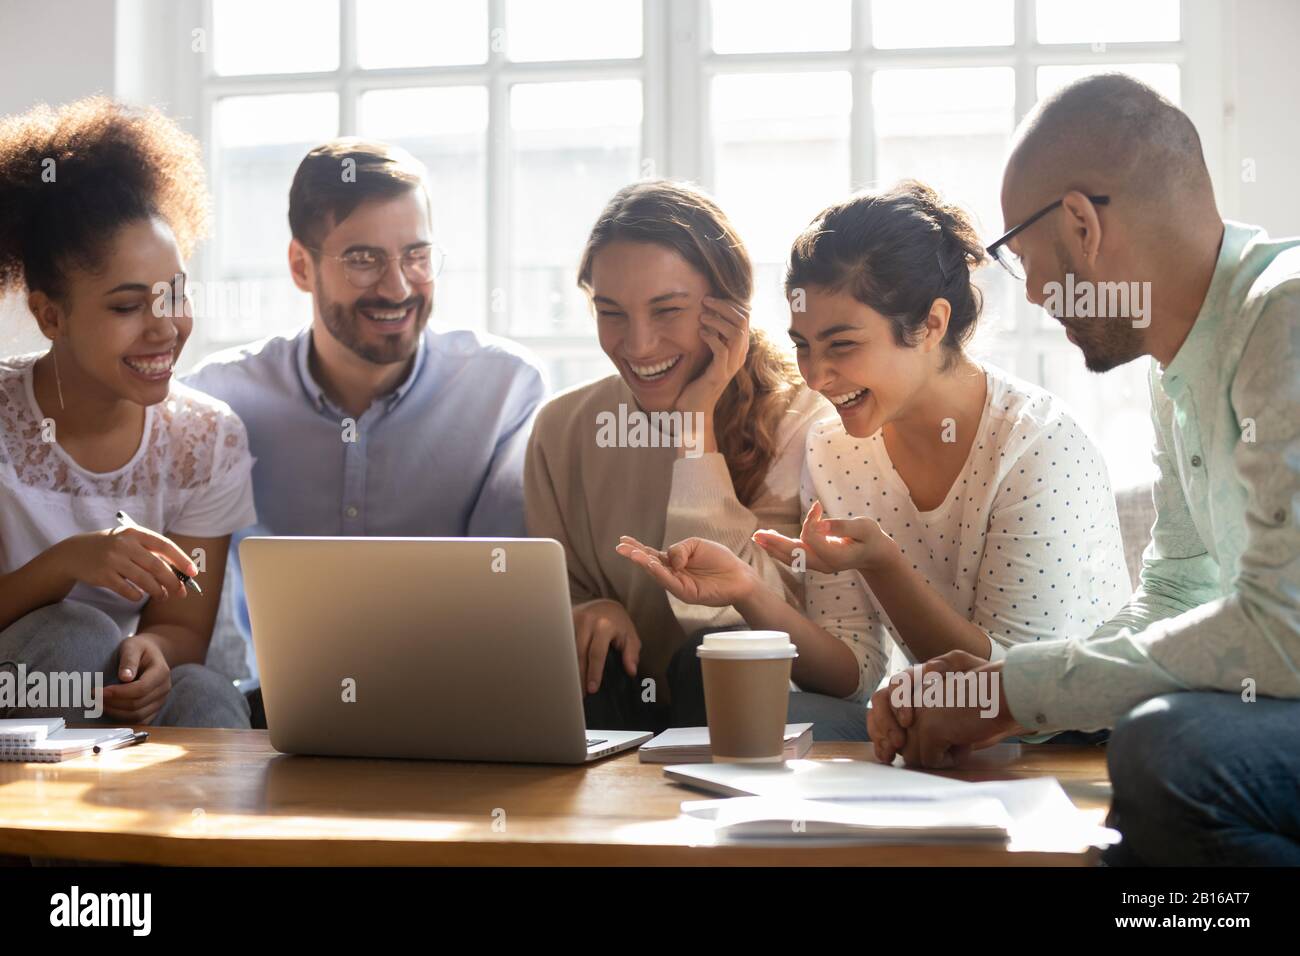 Multi-ethnic friends laughing enjoy comedy movie on computer Stock Photo